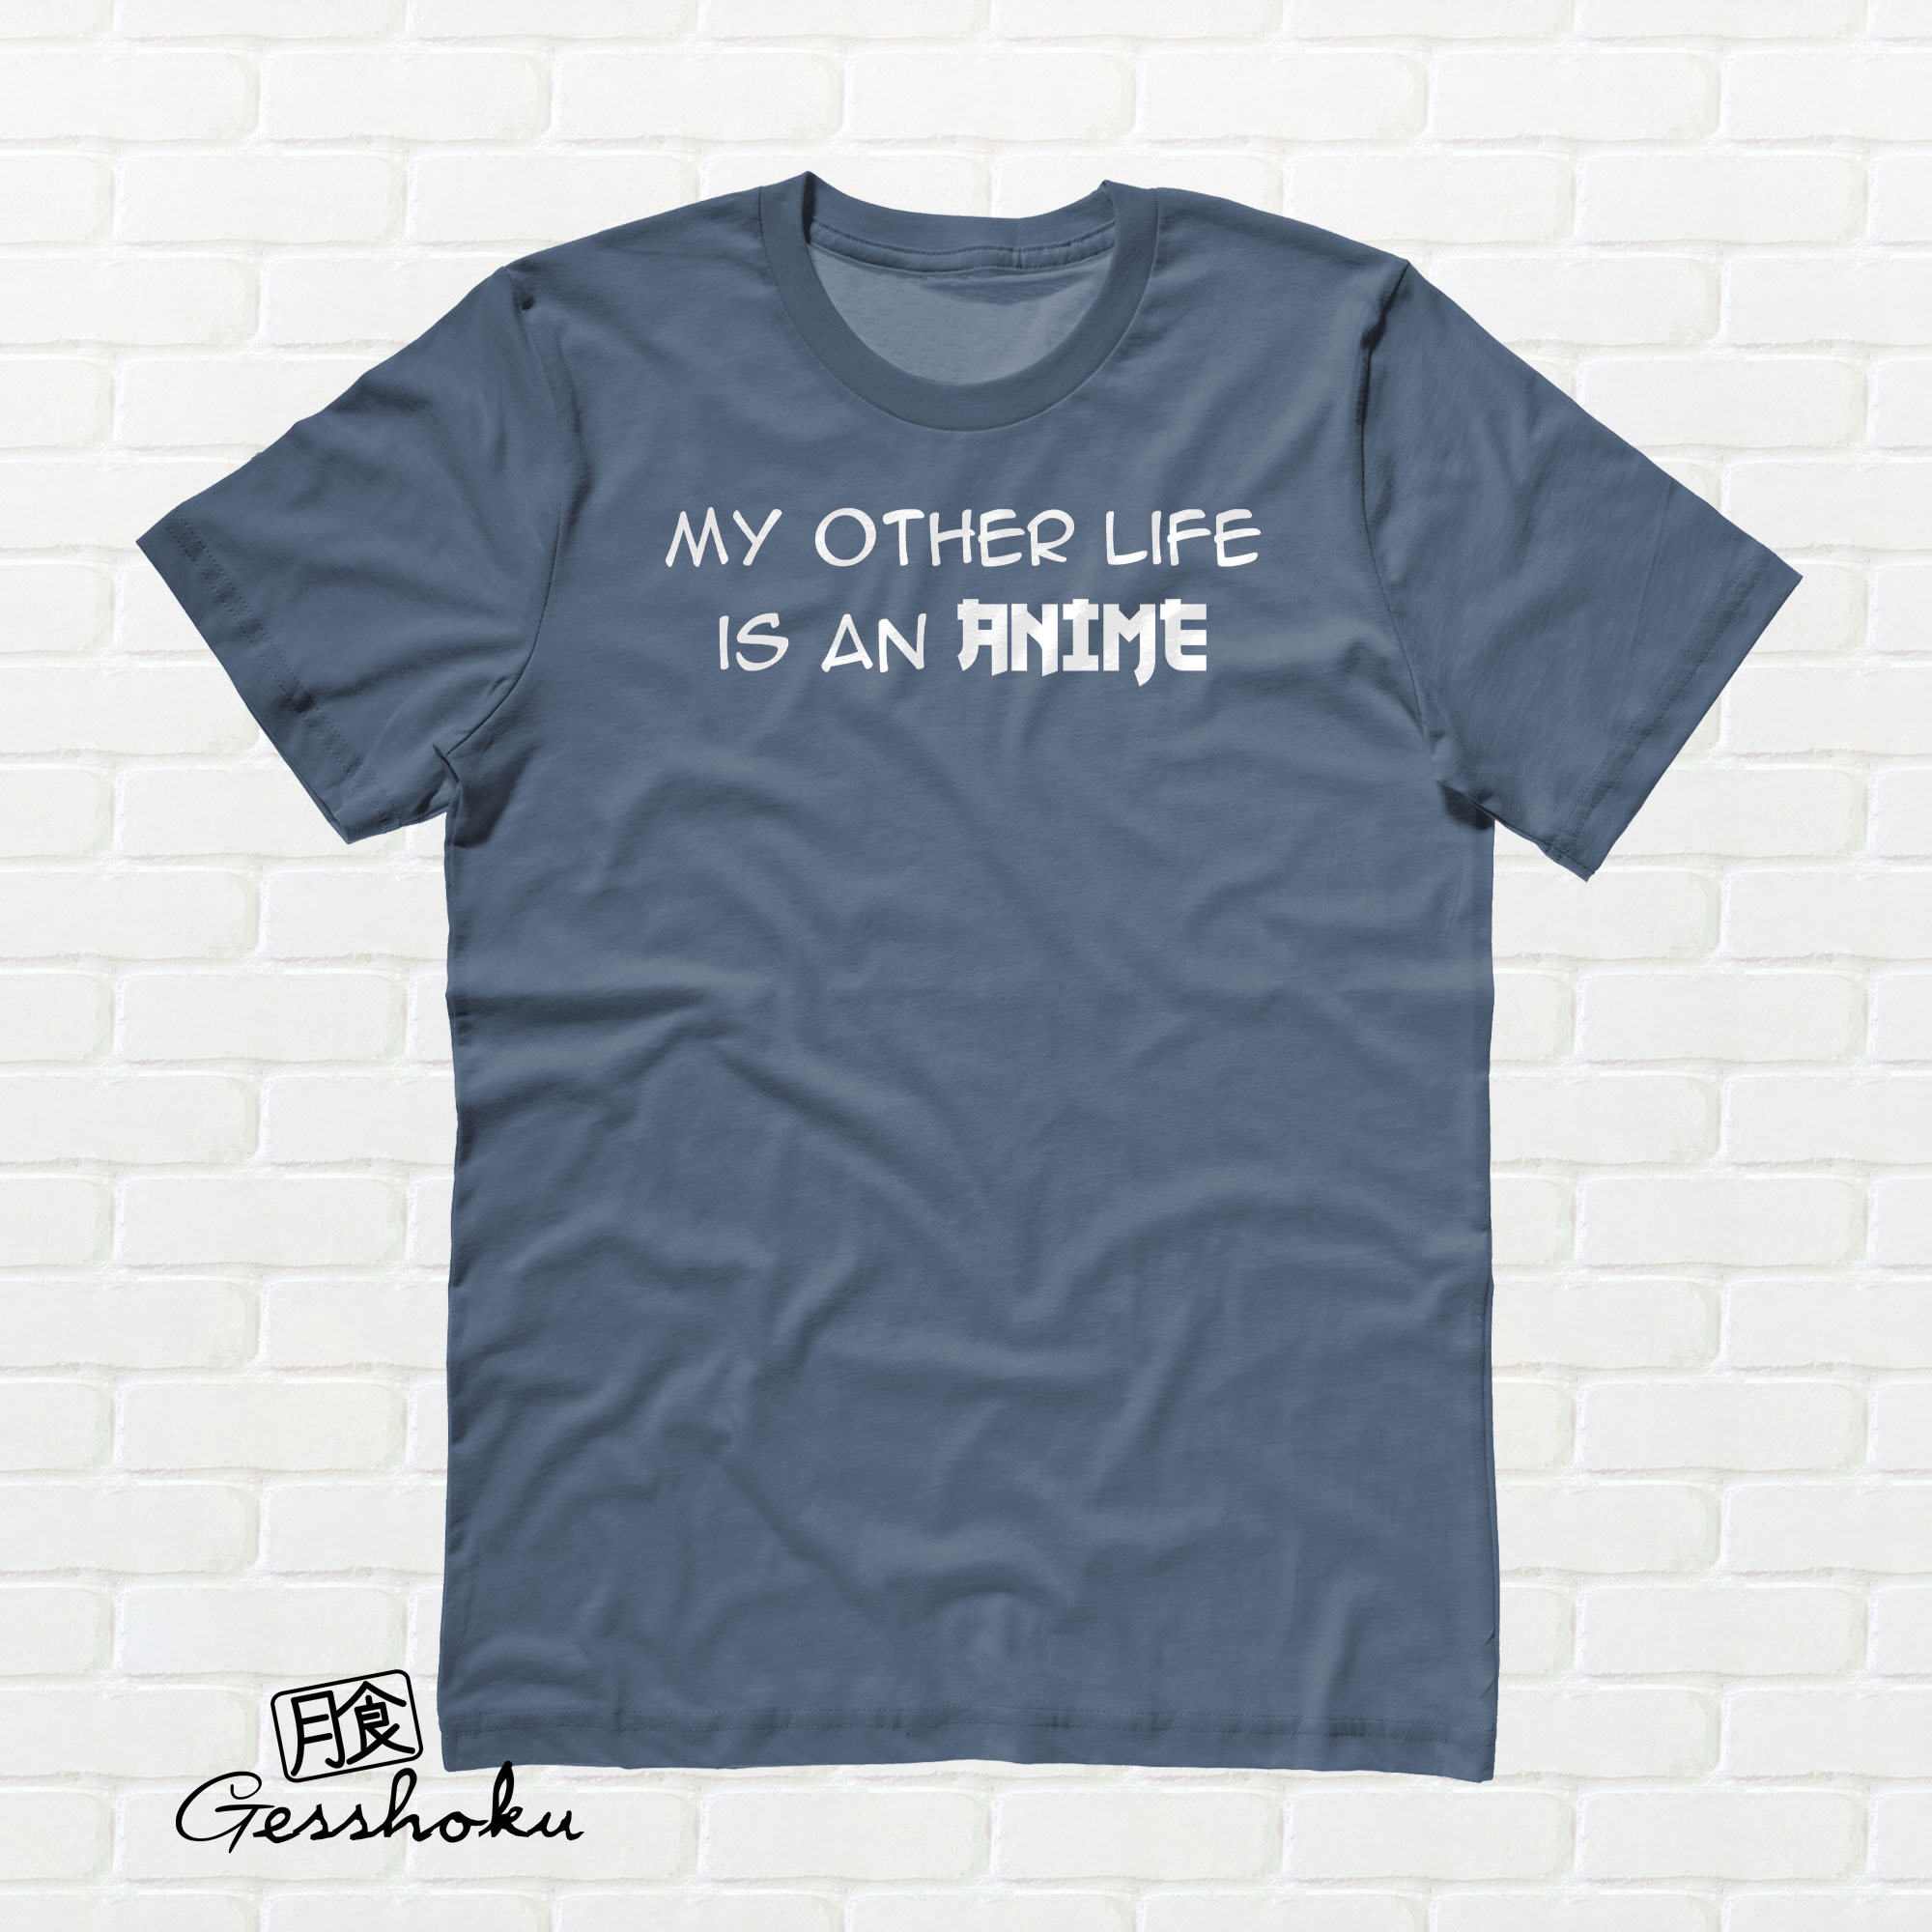 My Other Life is an Anime T-shirt - Stone Blue